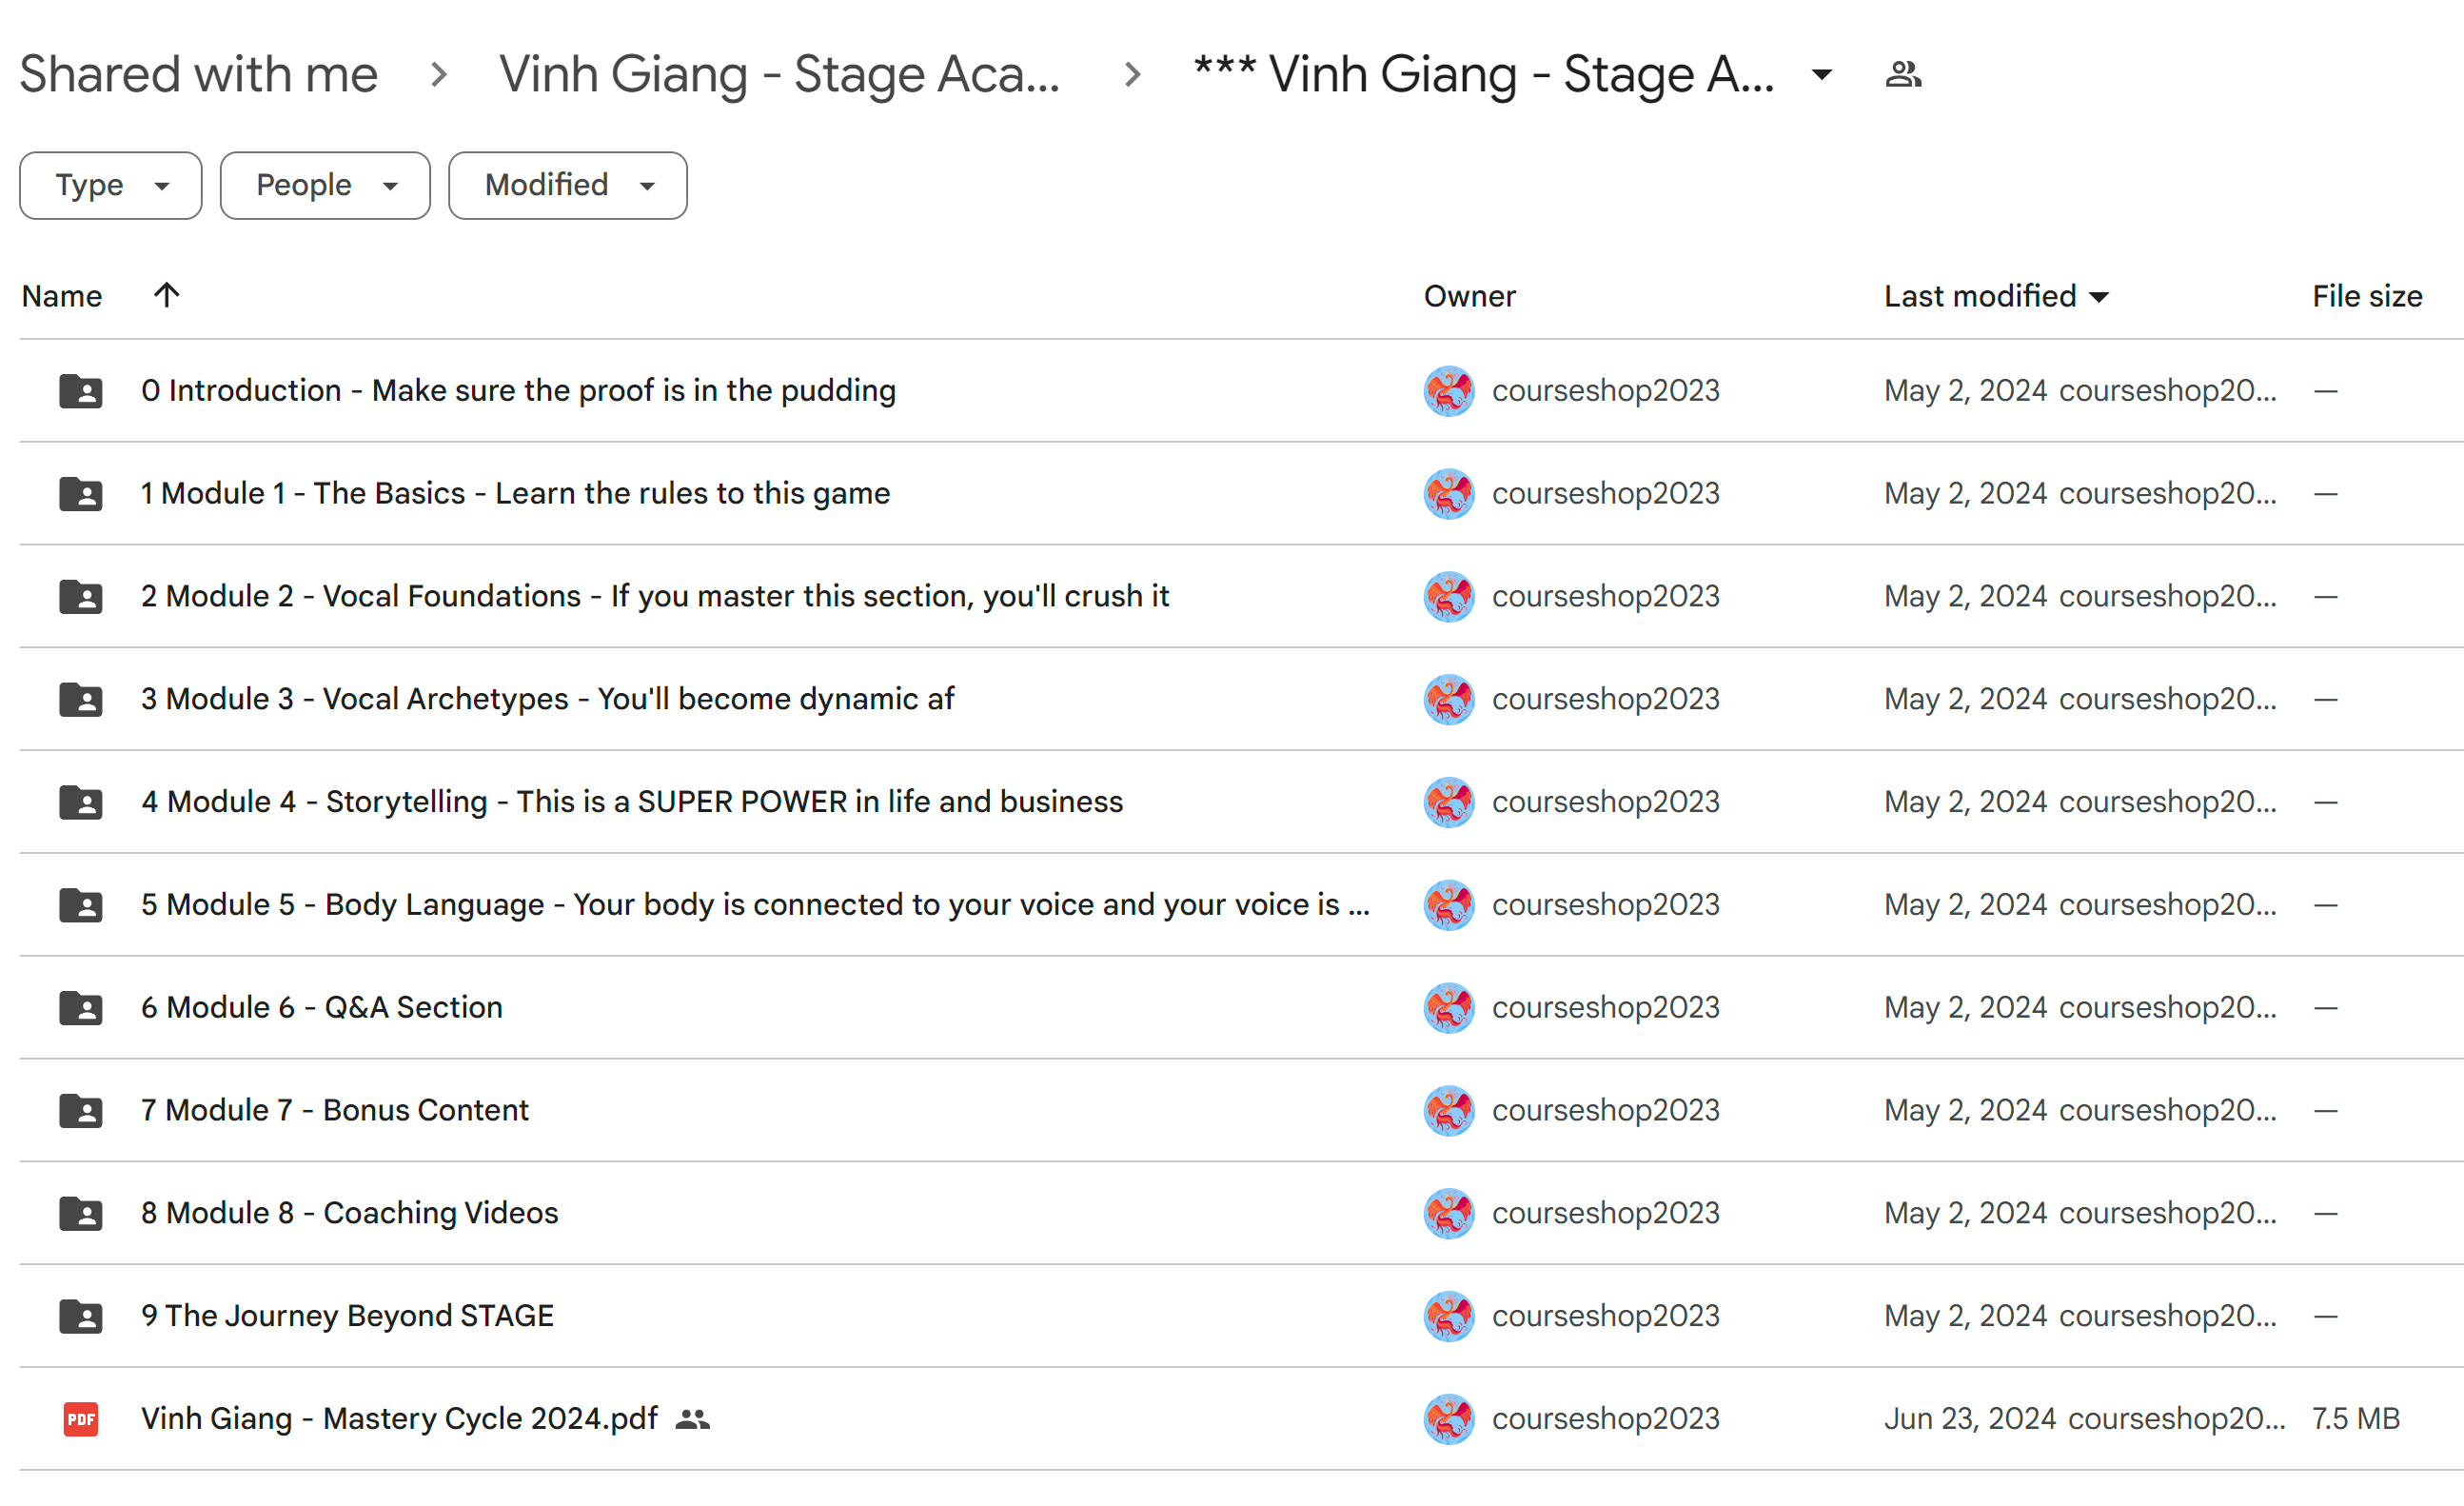 Vinh Giang Stage Academy Course 2024